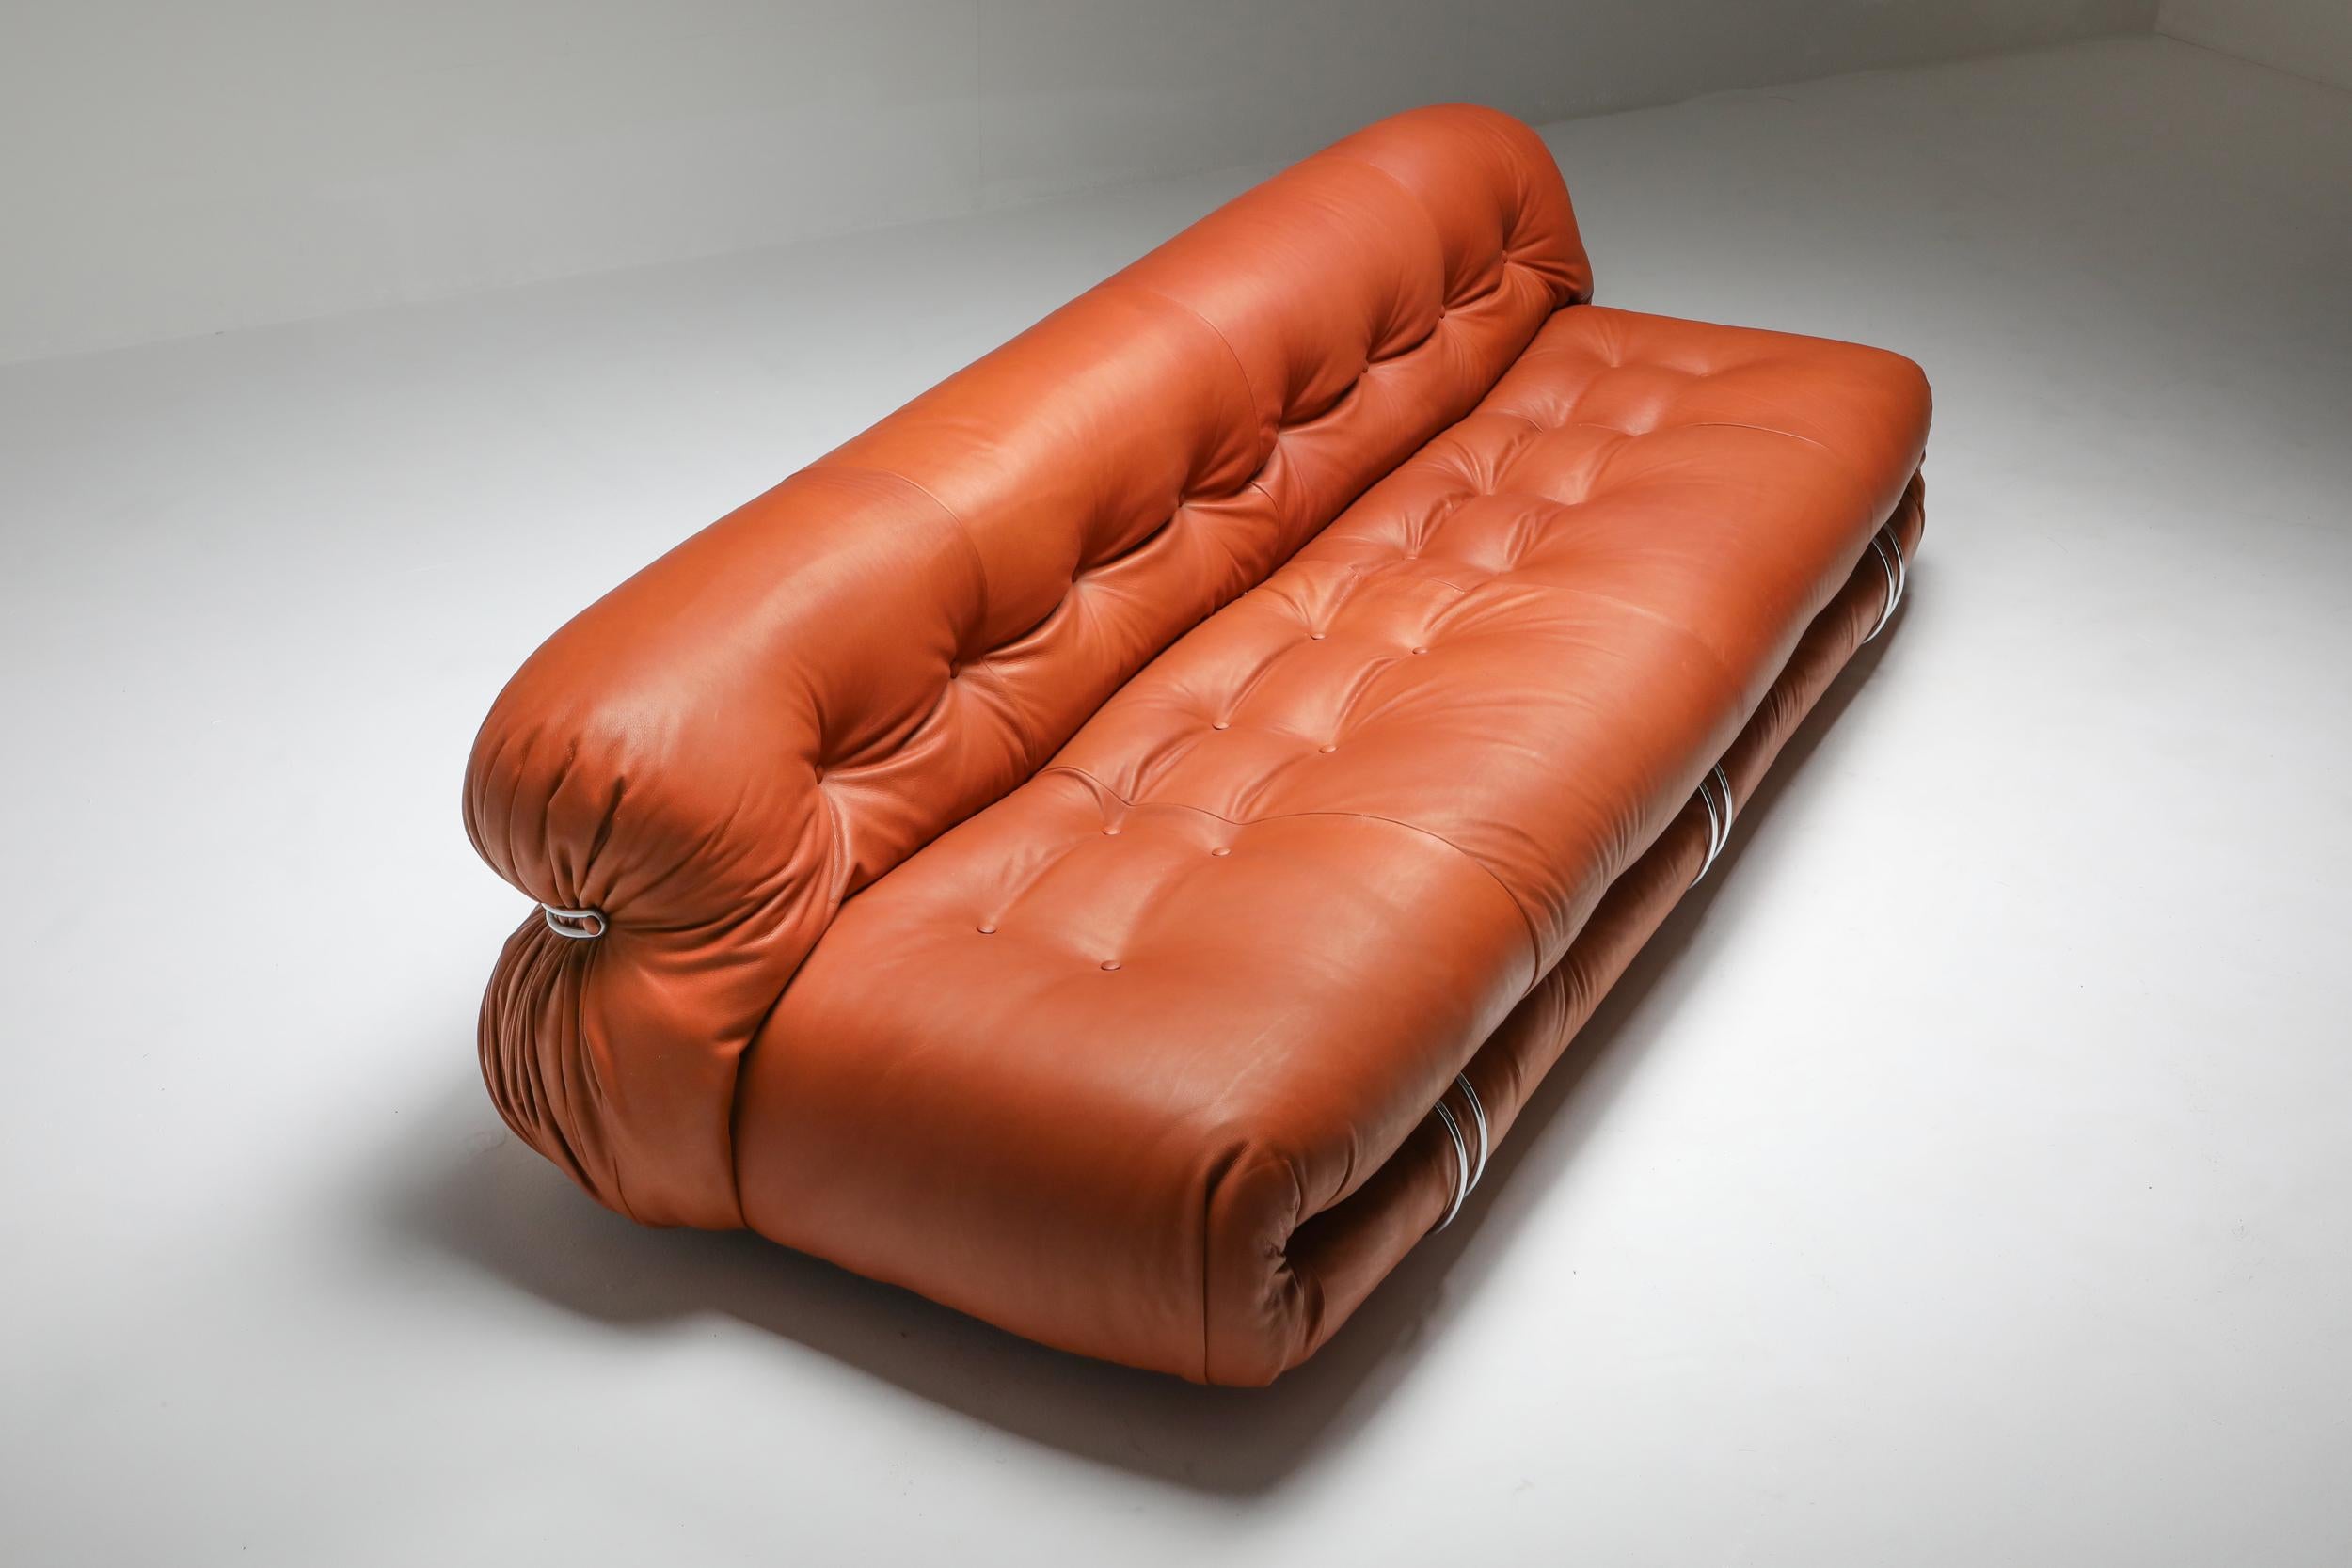 Post-Modern Cassina 'Soriana' Cognac Leather Sofa by Afra and Tobia Scarpa, 1970s For Sale